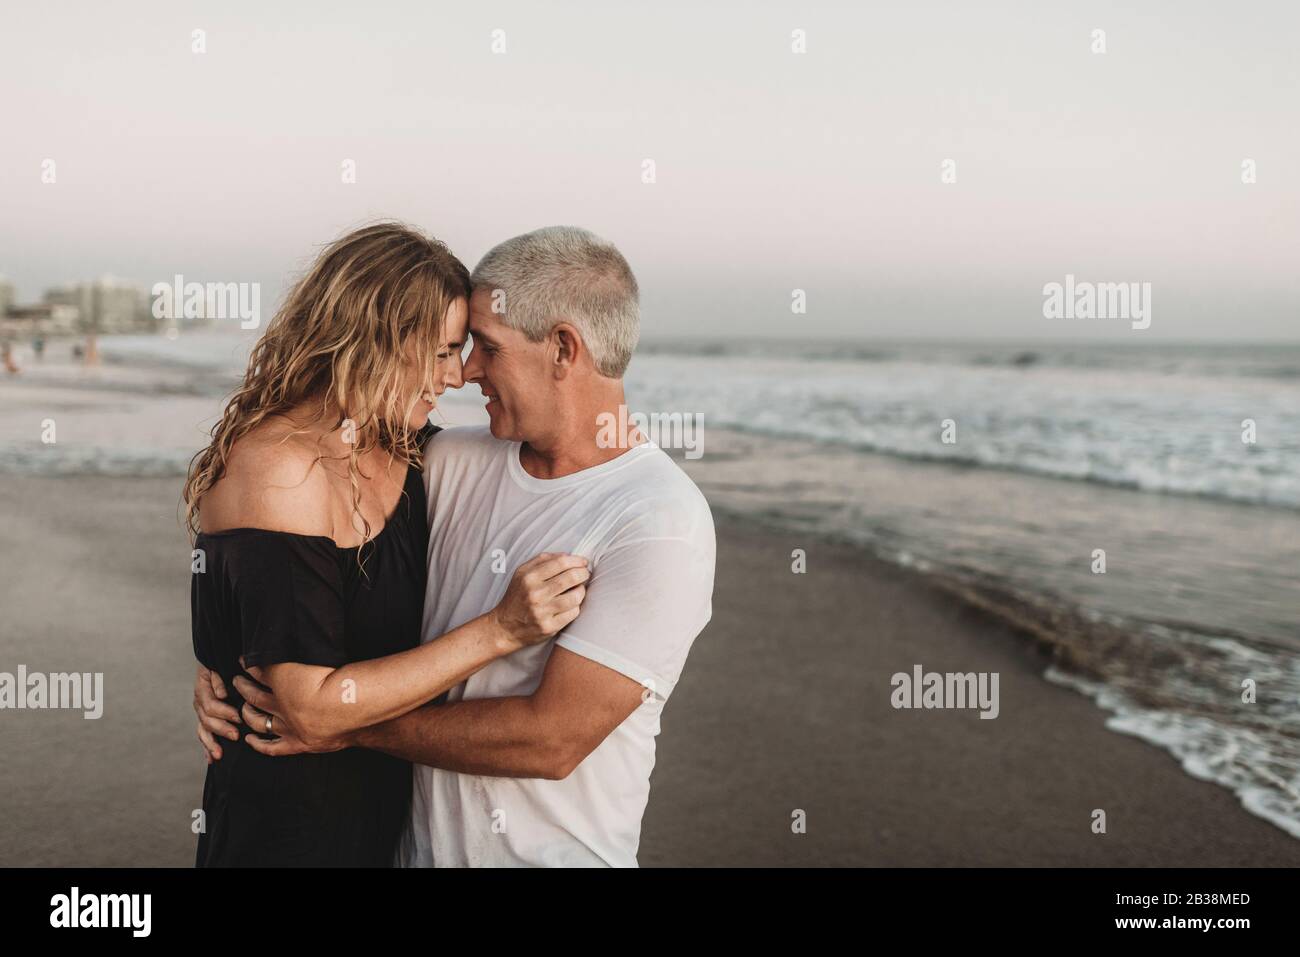 Side view of married couple embracing each other in ocean Stock Photo